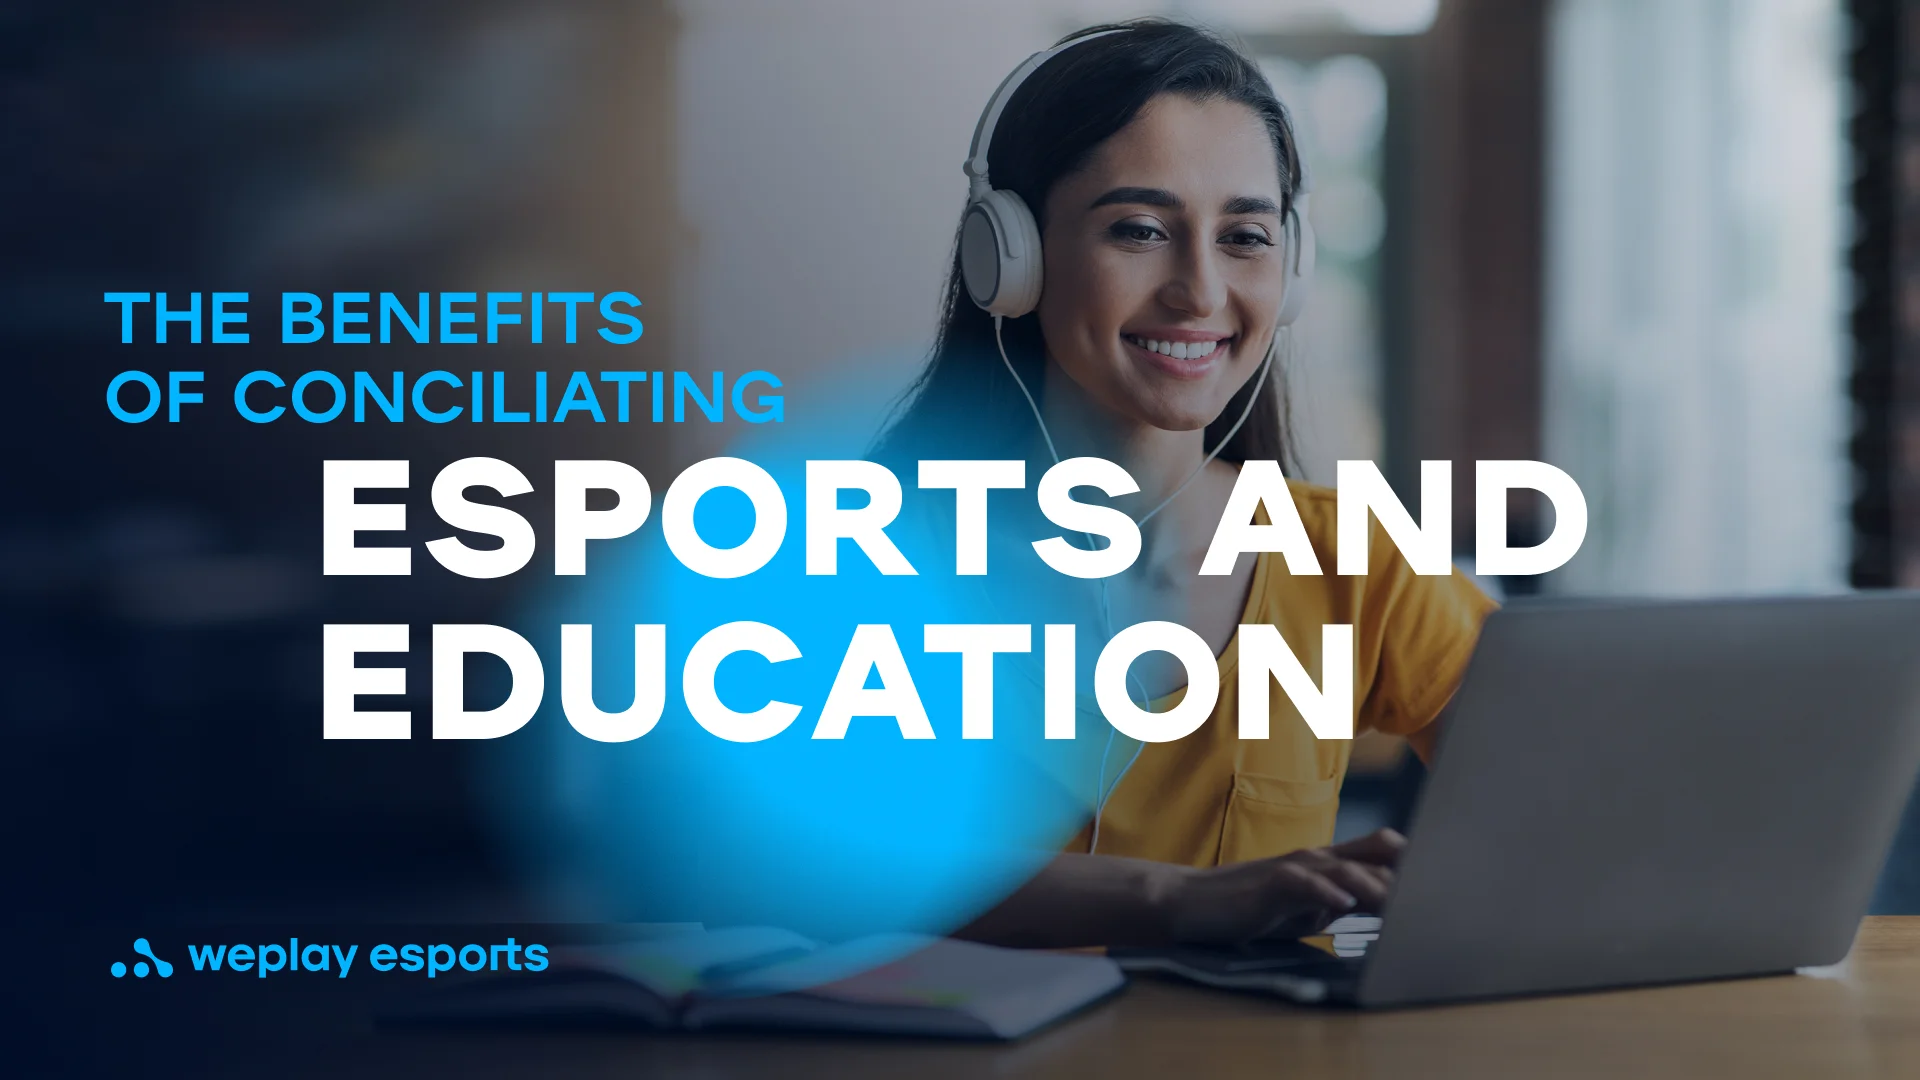 Why esports should be in schools the benefits of conciliating esports and education. Credit: WePlay Holding